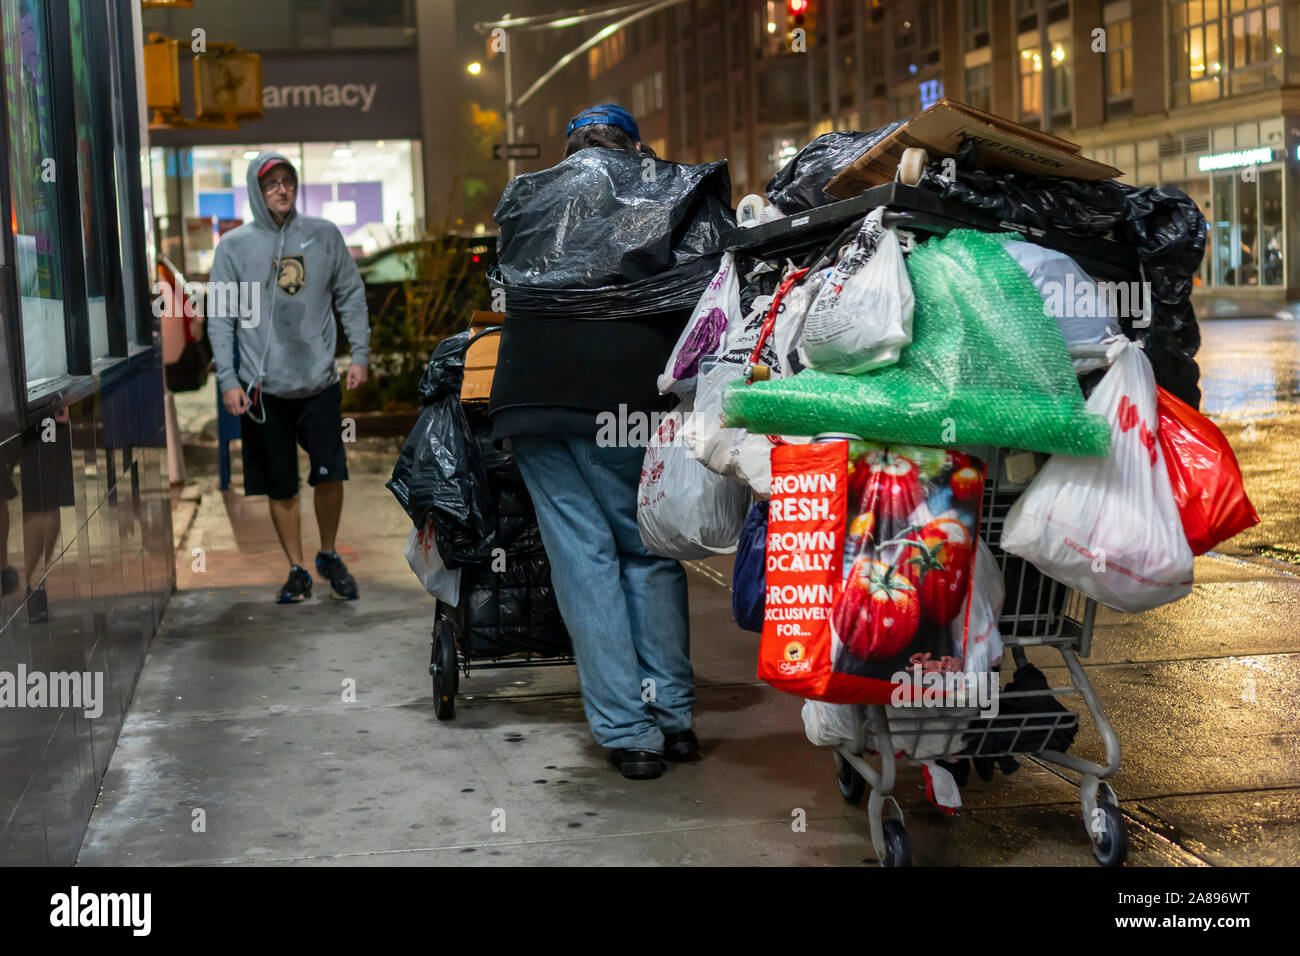 A homeless man with his possessions in the Chelsea neighborhood of New York on Tuesday, October 29, 2019. (© Richard B. Levine) Stock Photo